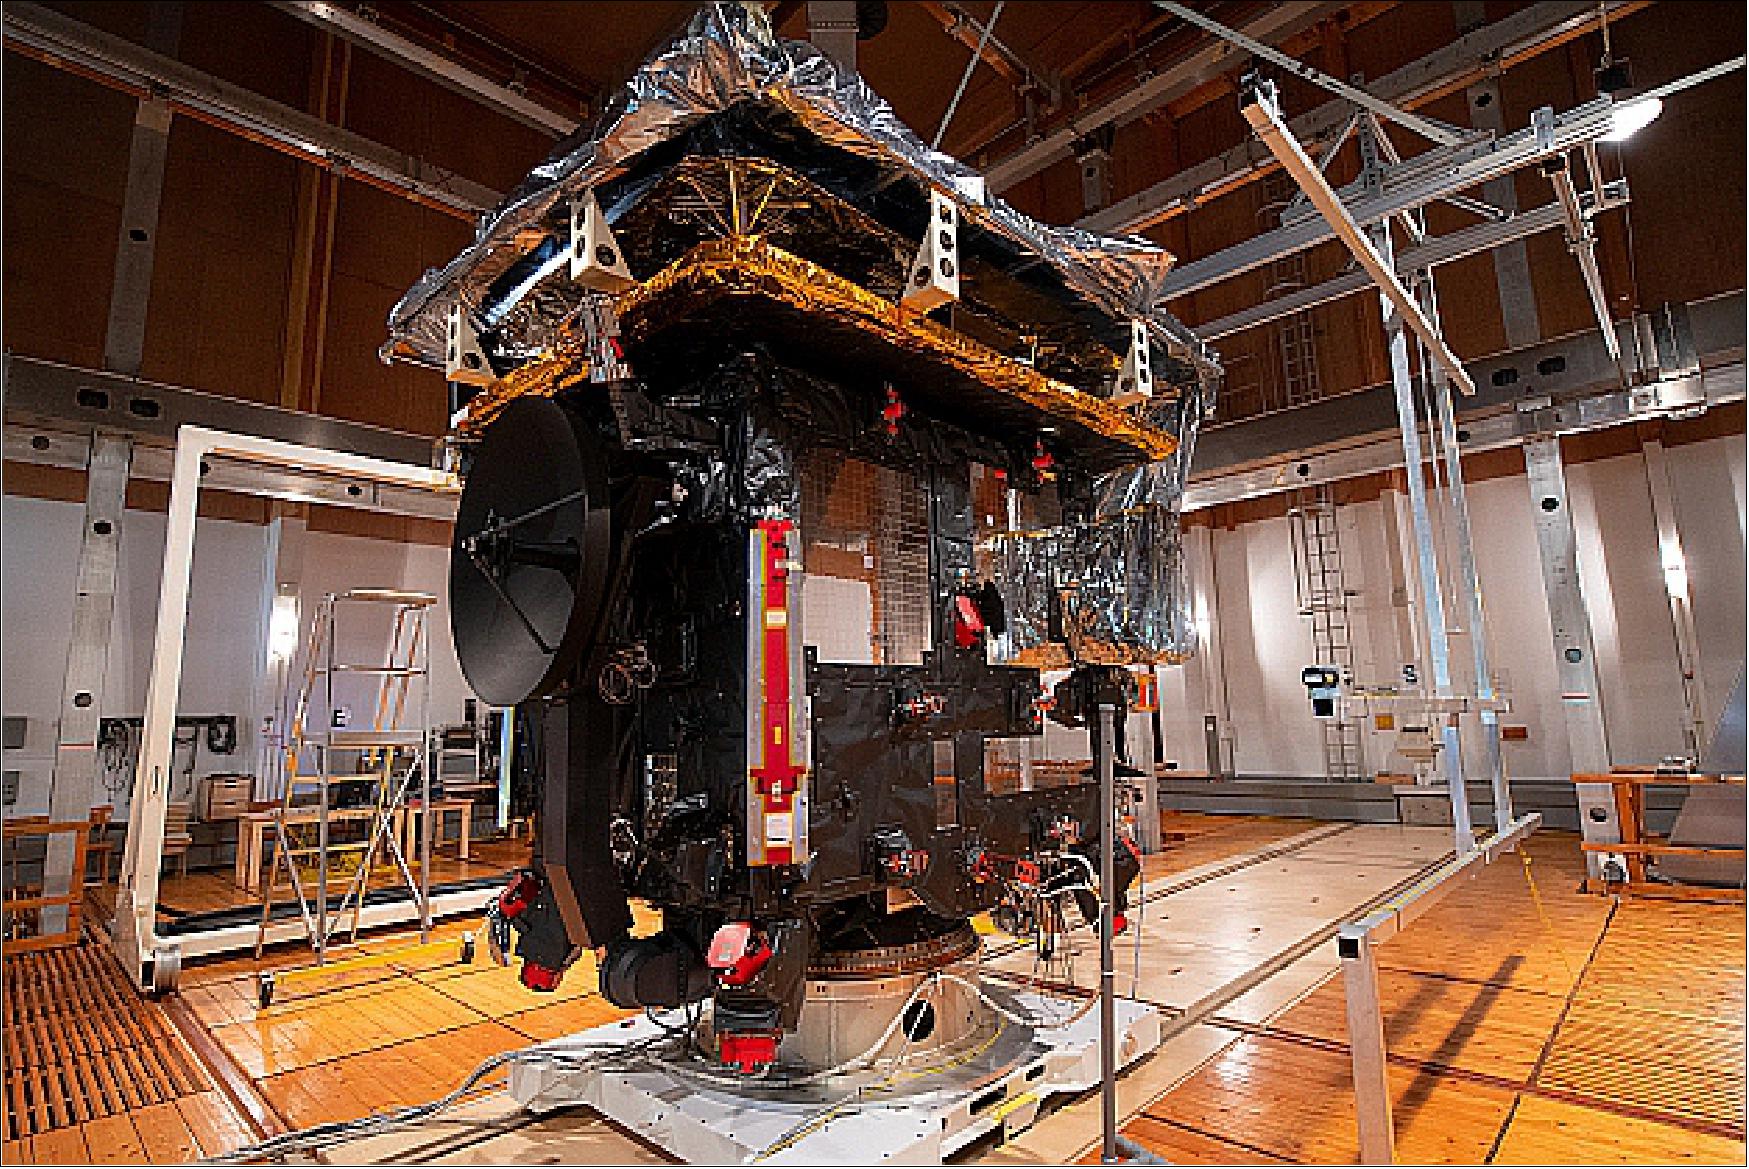 Figure 9: The Solar Orbiter spacecraft in the IABG magnetic field simulation facility in Ottobrunn, Germany. The facility is located just outside the premises in a nearby forest to avoid interference with human-generated magnetic fields, consists completely of non-magnetic materials like wood, and contains twelve 15 m coils – nearly as large as the building – to create a homogeneous magnetic environment that compensates Earth's own magnetic field, simulating outer space conditions. Tests performed here in June 2019 verified the magnetic behavior of the unpowered spacecraft, to make sure the magnetic field of Solar Orbiter is low enough so that the Magnetometer (MAG) instrument can operate at its most sensitive range (image credit: ESA–S. Corvaja)